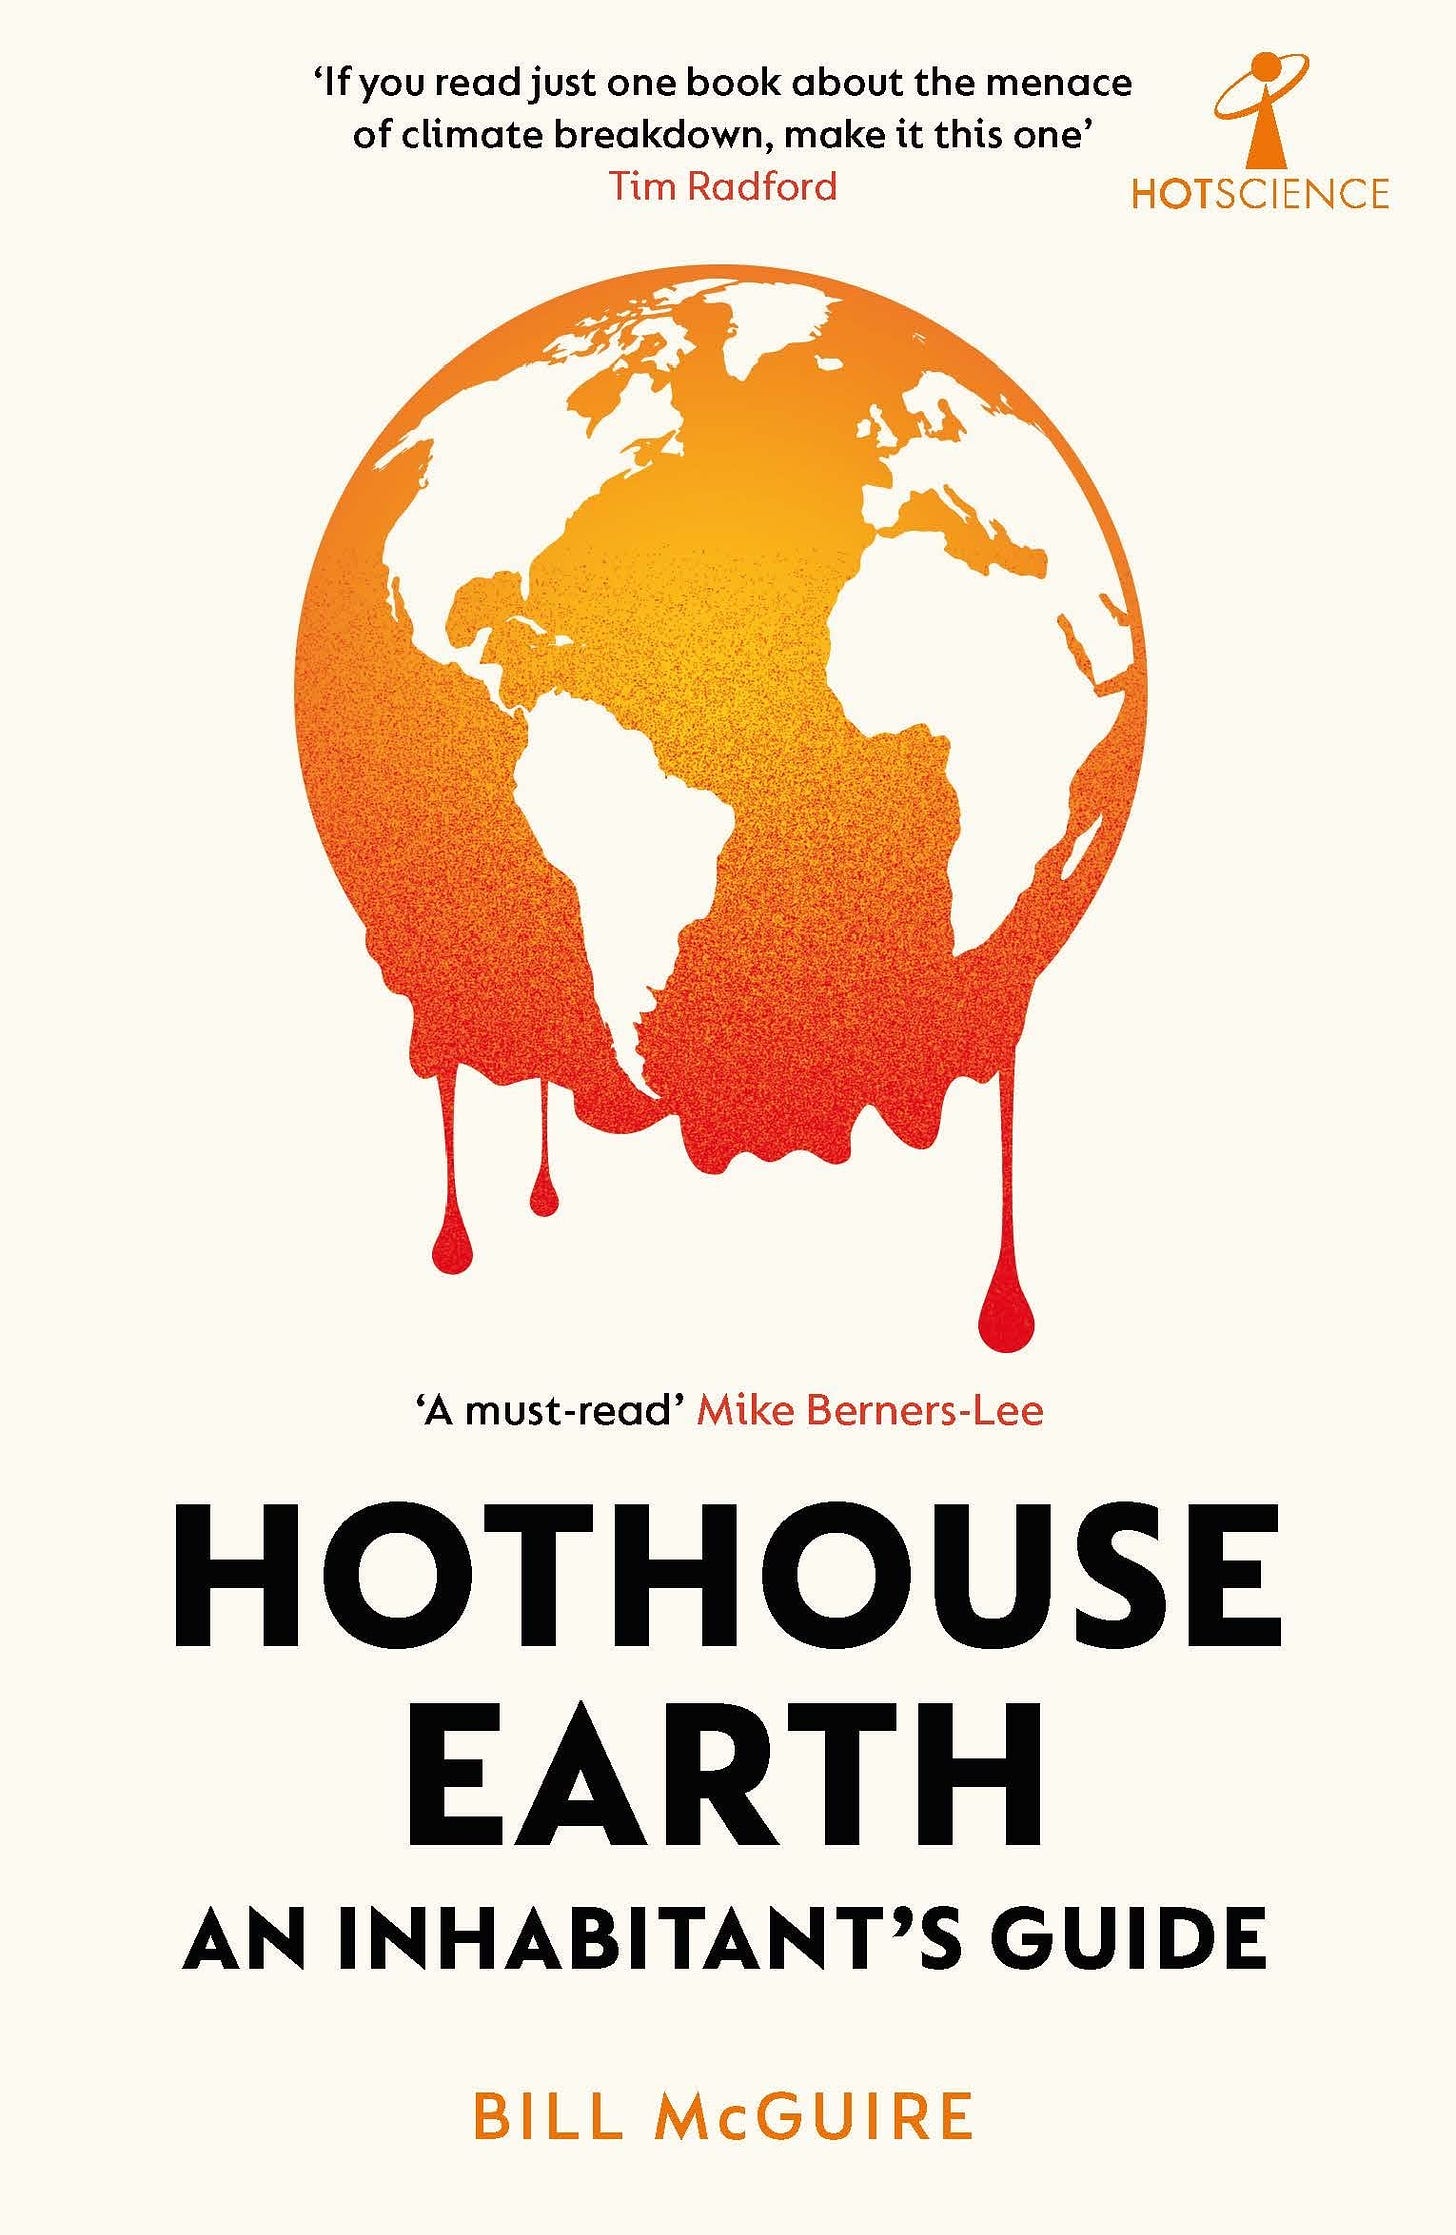 Hothouse Earth: An Inhabitant's Guide: Amazon.co.uk: McGuire, Bill:  9781785789205: Books